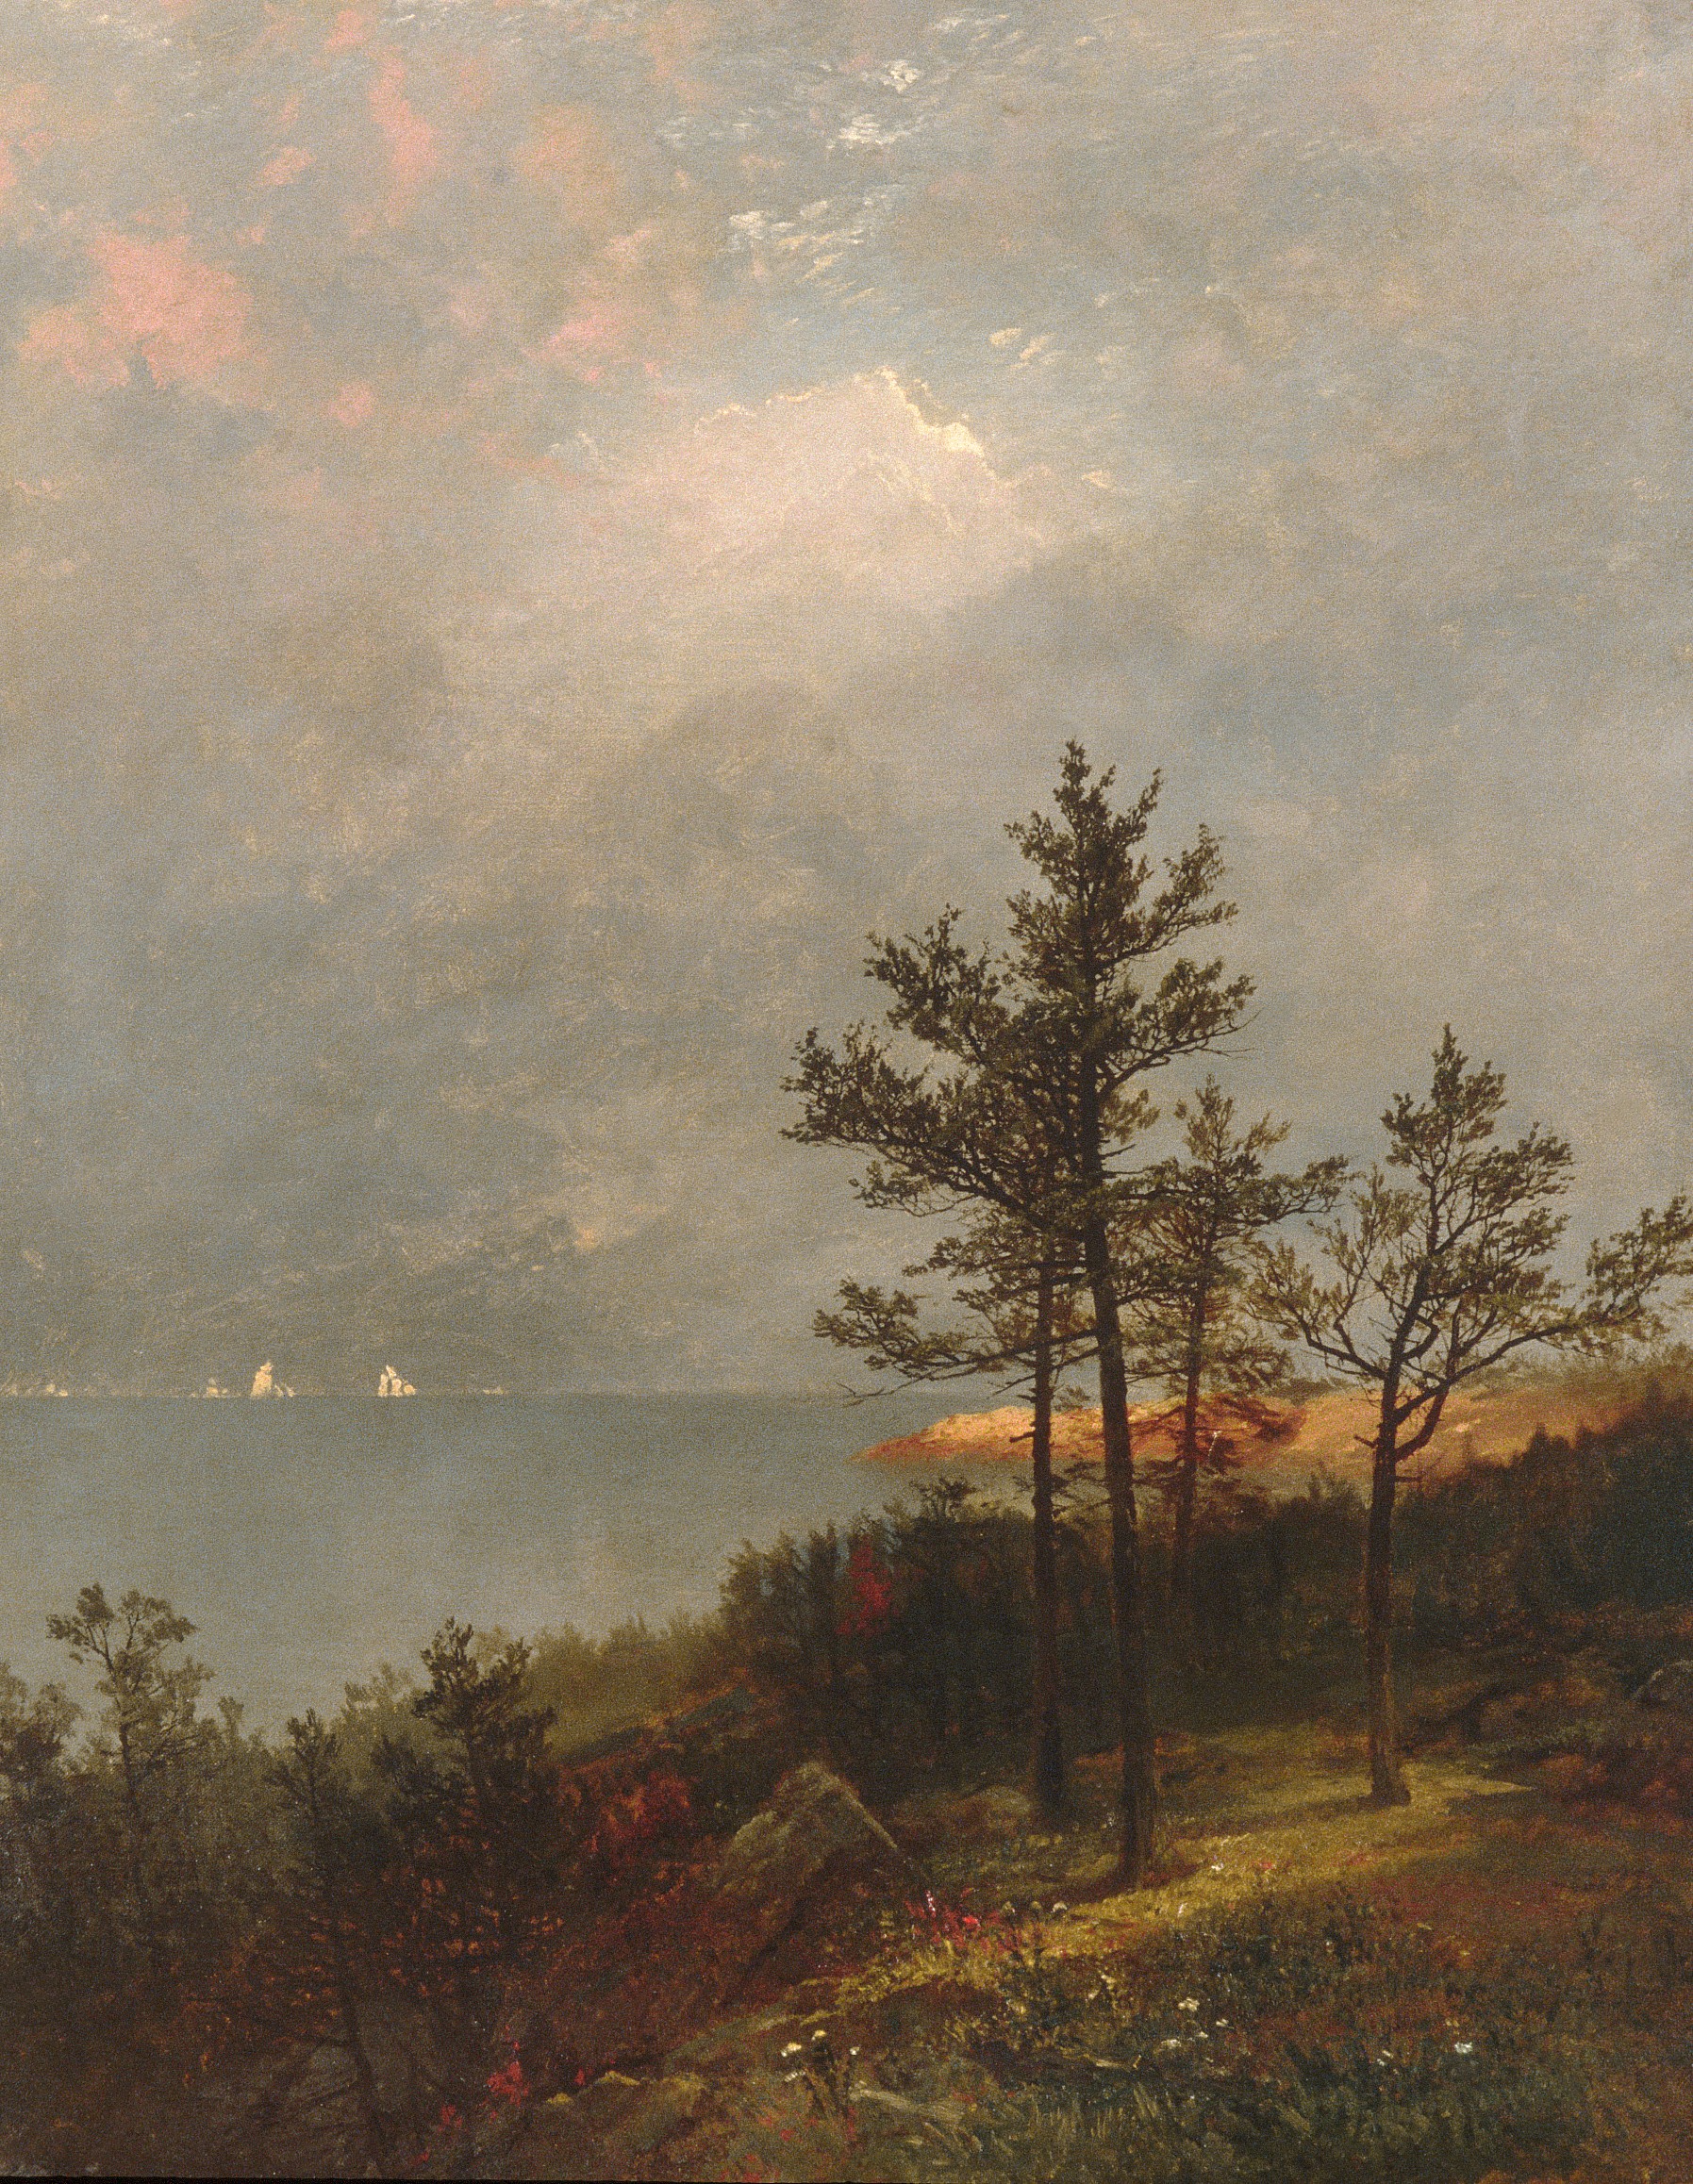 A landscape view of trees in a grassy area overlooking an ocean with a storm brewing in the sky